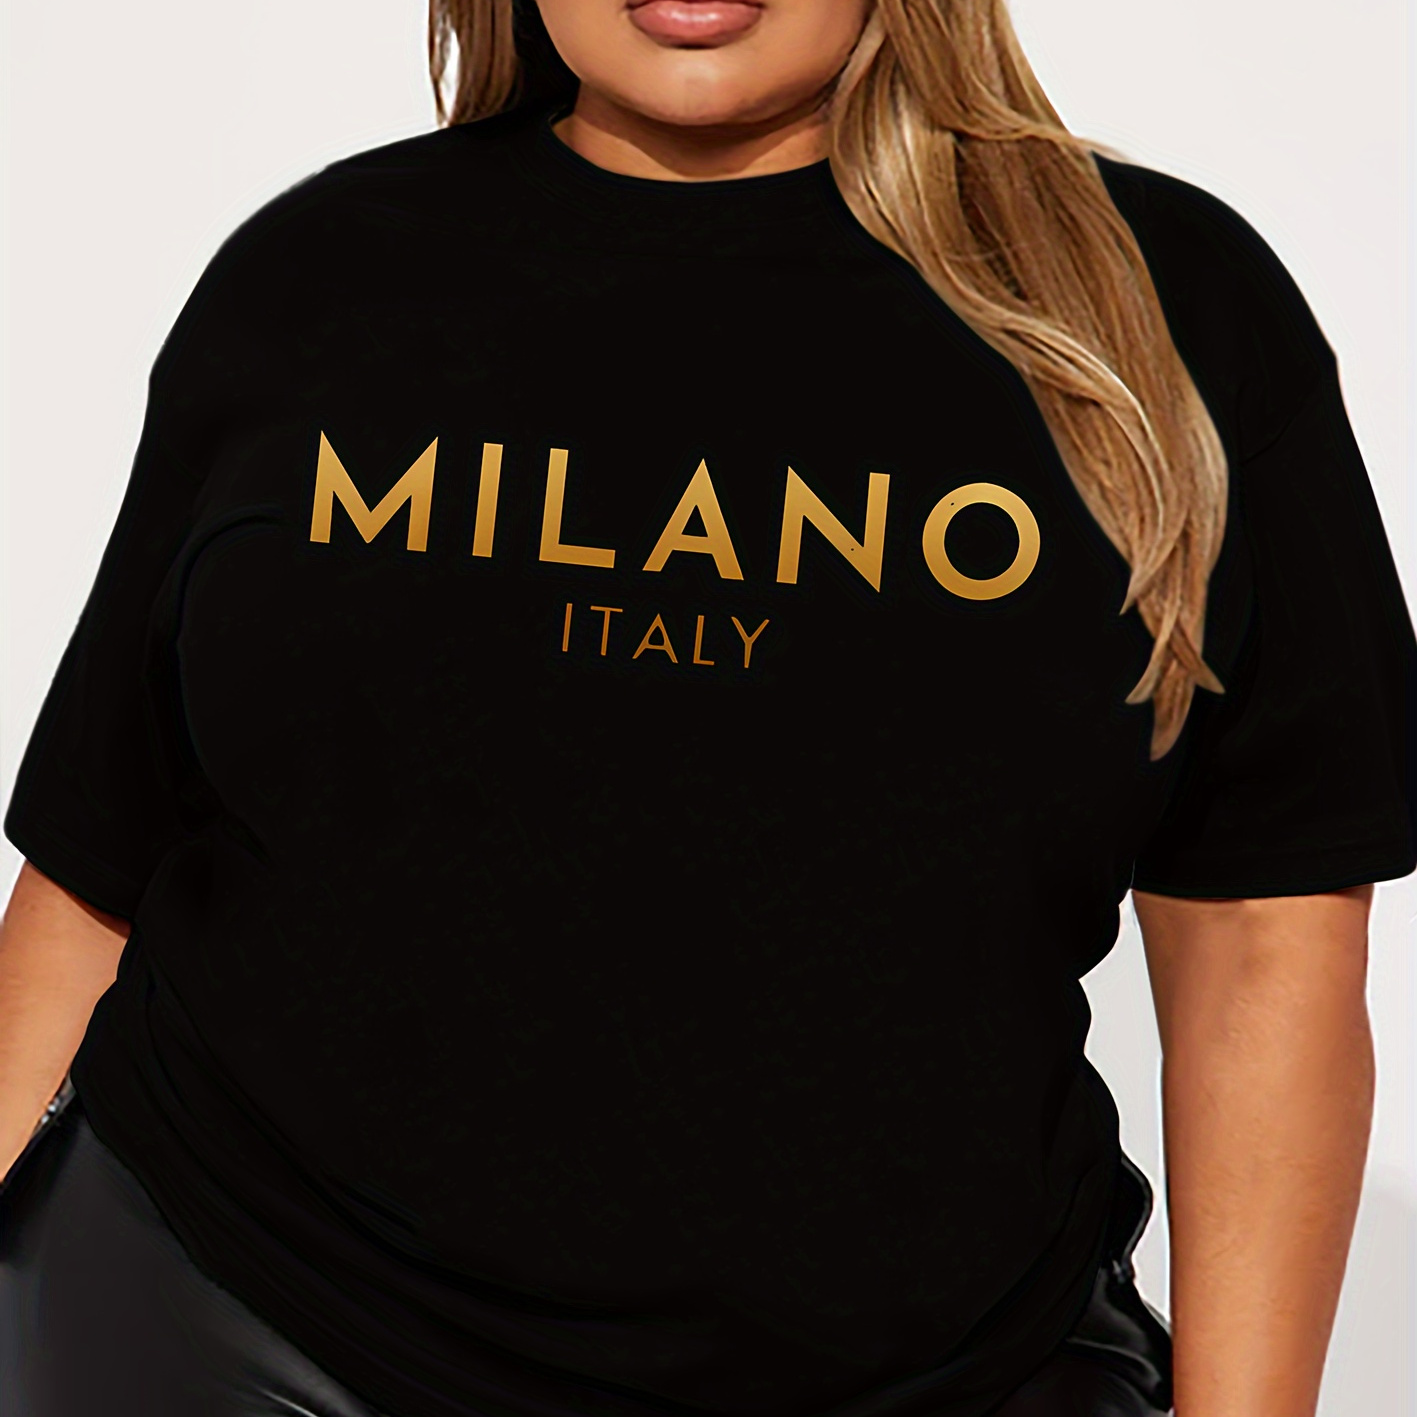 

Women's Plus Size Casual Sporty T-shirt, Milano Italy Print, Comfort Fit Short Sleeve Tee, Fashion Breathable Casual Top